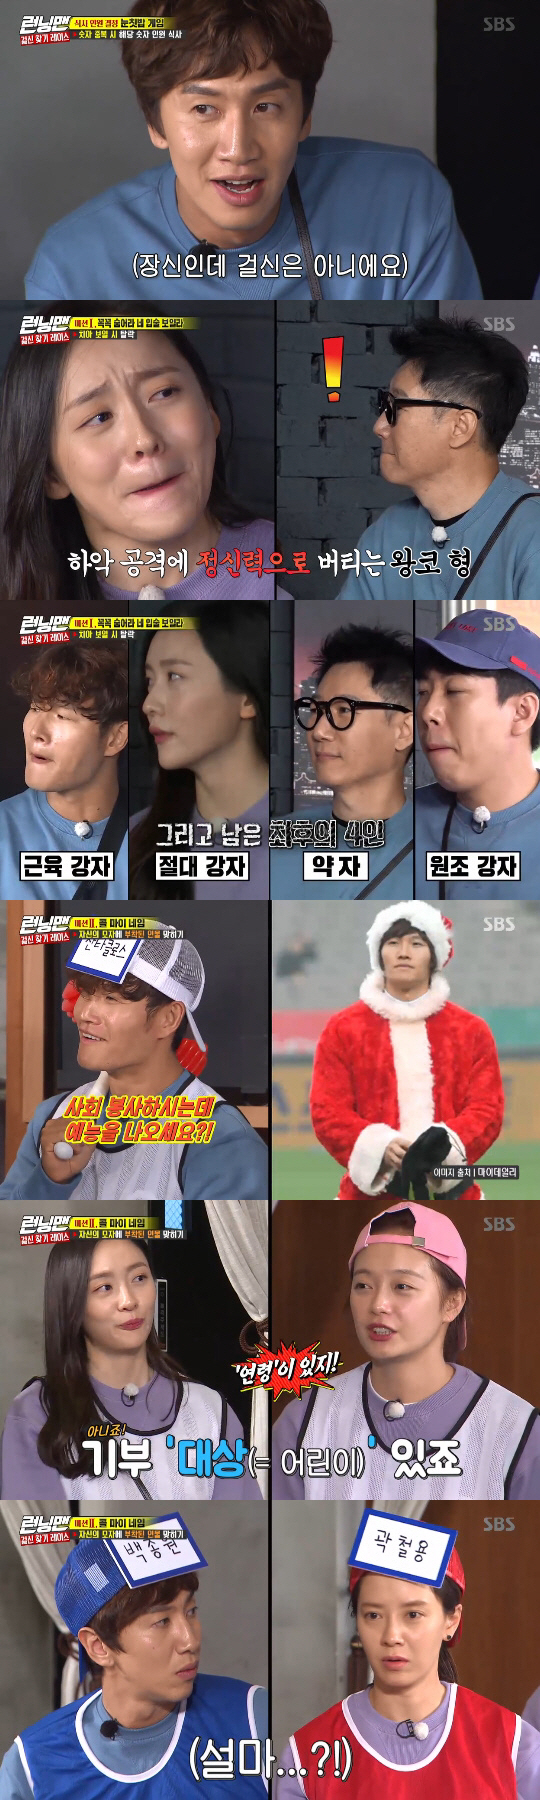 Running Man Jeon So-min and Hong Hyun-hee won the victory by succeeding in Gülsin Onay Hidden.On SBS Running Man broadcasted on the 3rd night, Gülsin Onay Find Race was held.Yoo Jae-Suk, Song Ji-hyo, Jeon So-min and Yang Se-chan received penalties from the opening.In the last broadcast, the winners of the opening makeup penalties were transformed into Lamar Jackson, Angry Bird, Minions, and octopus witch Usla, respectively.Since then, the penalties have received a simple pre-mission from the production team before the full-scale mission.Four other members who have not received a penalty, guest Hong Hyun-hee and Park Ji-hyun, should escape for 30 minutes and keep the name tag with the chance.First Haha captured Song Ji-hyo, dressed as Angry Bird.Having the opportunity to rip off two name tags, Haha won the chance as soon as he first opened it and made Song Ji-hyo in-N-Out Burger.Haha then won the chance of Jeon So-min, who turned into a minion.Hong Hyun-hee also got a chance to in-N-Out Burger Yang Se-chan, who dressed as an octopus witch Usla.Yoo Jae-Suk, who turned into Lamar Jackson, avoided the members well, but unfortunately was caught by Lee Kwang-soo just before the end.However, Lee Kwang-soo did not open the name tag of the name tag of Yoo Jae-Suk, and the chance ticket became the charge of Yoo Jae-Suk.On the other hand, the mission of the day is a restaurant tour race with guests.Only the winning members can eat, with the number of people to eat and the commission different from each restaurant, and the members who won the chance before could use only one bite at the restaurant they wanted when they did not get a chance to eat.However, two Gülsin Onay existed among the members, and Hidden Mission of Gülsin Onay was not to eat.The members should taste the three delicacies and then vote for Gülsin Onay to find Gülsin Onay, which did not eat food.If they could not find out, Gülsin Onay won, and the two identified by Gülsin Onay had to remain after work and carry out a hand-washing penalty.Members who received the mission doubted Lee Kwang-soo, who had been in a poor state of mission performance.The members who moved to the mission place then went on to game with the first set of delicacies, the Tongdol octopus meeting set; the first game was the snowball game, which set the number of meals.Members suspected Lee Kwang-soo, who was caught in the game, and Yoo Jae-Suk, who interfered with the game.In the game, which puts the teeth into the lips without seeing them, Park Ji-hyun transformed into a Dutch grandmother and played a big role.As a result, three people ate food from the first game to Park Ji-hyun, Yang Se-chan and Haha using the chance.The crew reported that there was no Gülsin Onay among the three, and the remaining members were more suspicious.Game, which was played with a second delicacy crab pasta, was a game to hit the figure. Kim Jong-kook won the first round, and Hong Hyun-hee won the second round.The winning team Yoo Jae-Suk, Ji Suk-jin, Lee Kwang-soo, Hong Hyun-hee and Haha, who used the chance, were eaten, and Gülsin Onay was confirmed as one of them.This did not make it possible to eat, but it was revealed that one of Kim Jong-kook, Song Ji-hyo, and Jeon So-min was Gülsin Onay.After the third delicacy, the members continued to receive the last mission.Ji Suk-jin and Song Ji-hyo, who had many toxic mistakes, were suspected of being Gülsin Onay in the Ji Suk-jin team, and Yoo Jae-Suk and Jeon So-min, who made mistakes in the Yoo Jae-Suk team, were suspected of being Gülsin Onay.Ahead of the final Gülsin Onay arrest, the members suspected Song Ji-hyo, who had a late, unexpected hole performance with Lee Kwang-soo, who had been suspected from start to finish, as Gülsin Onay, and the two won seven votes as a result.However, the two were not Gülsin Onay, and Jeon So-min and Hong Hyun-hee, who received two votes from Song Ji-hyo and Park Ji-hyun, were identified as Gülsin Onay.Jeon So-min made frequent mistakes in the mission and did not deliberately win the meal ticket, and Hong Hyun-hee won the chance from the beginning to avoid the members death. The two men who succeeded in the commission chose the penalties Zhong You Kim Jong-kook and Lee Kwang-soo, and the two were hand-washed side by side.